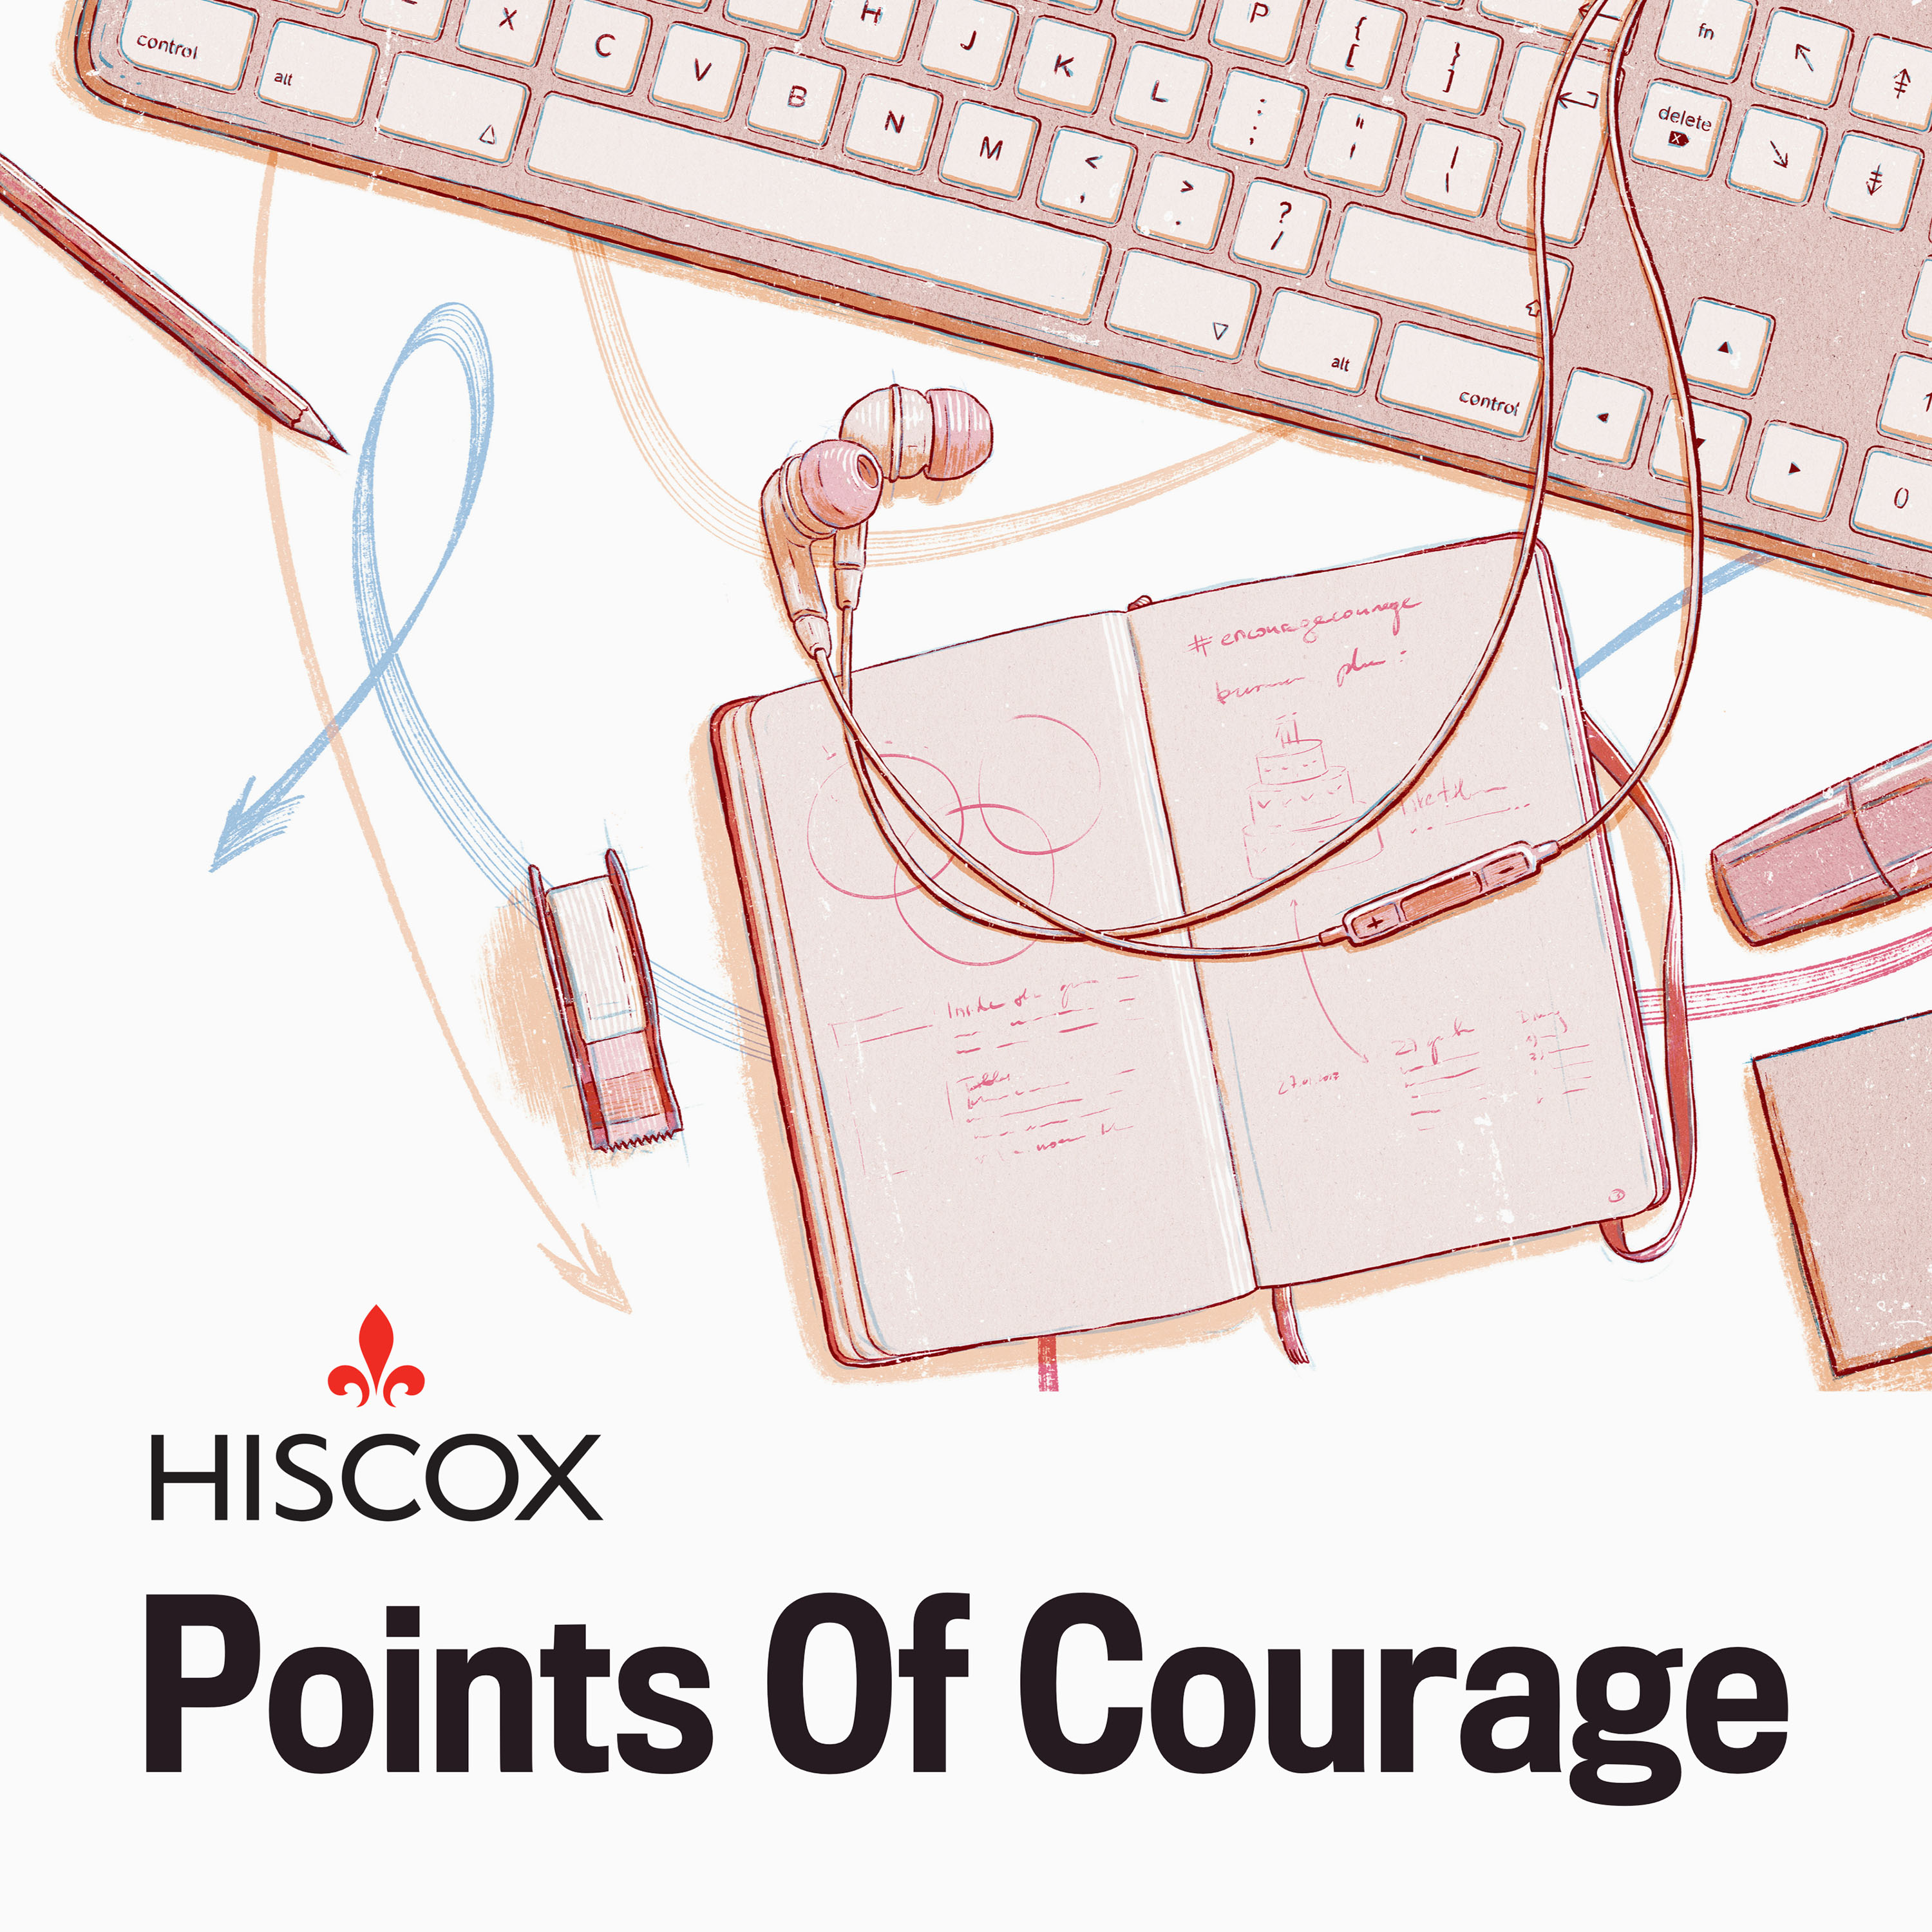 Points of Courage